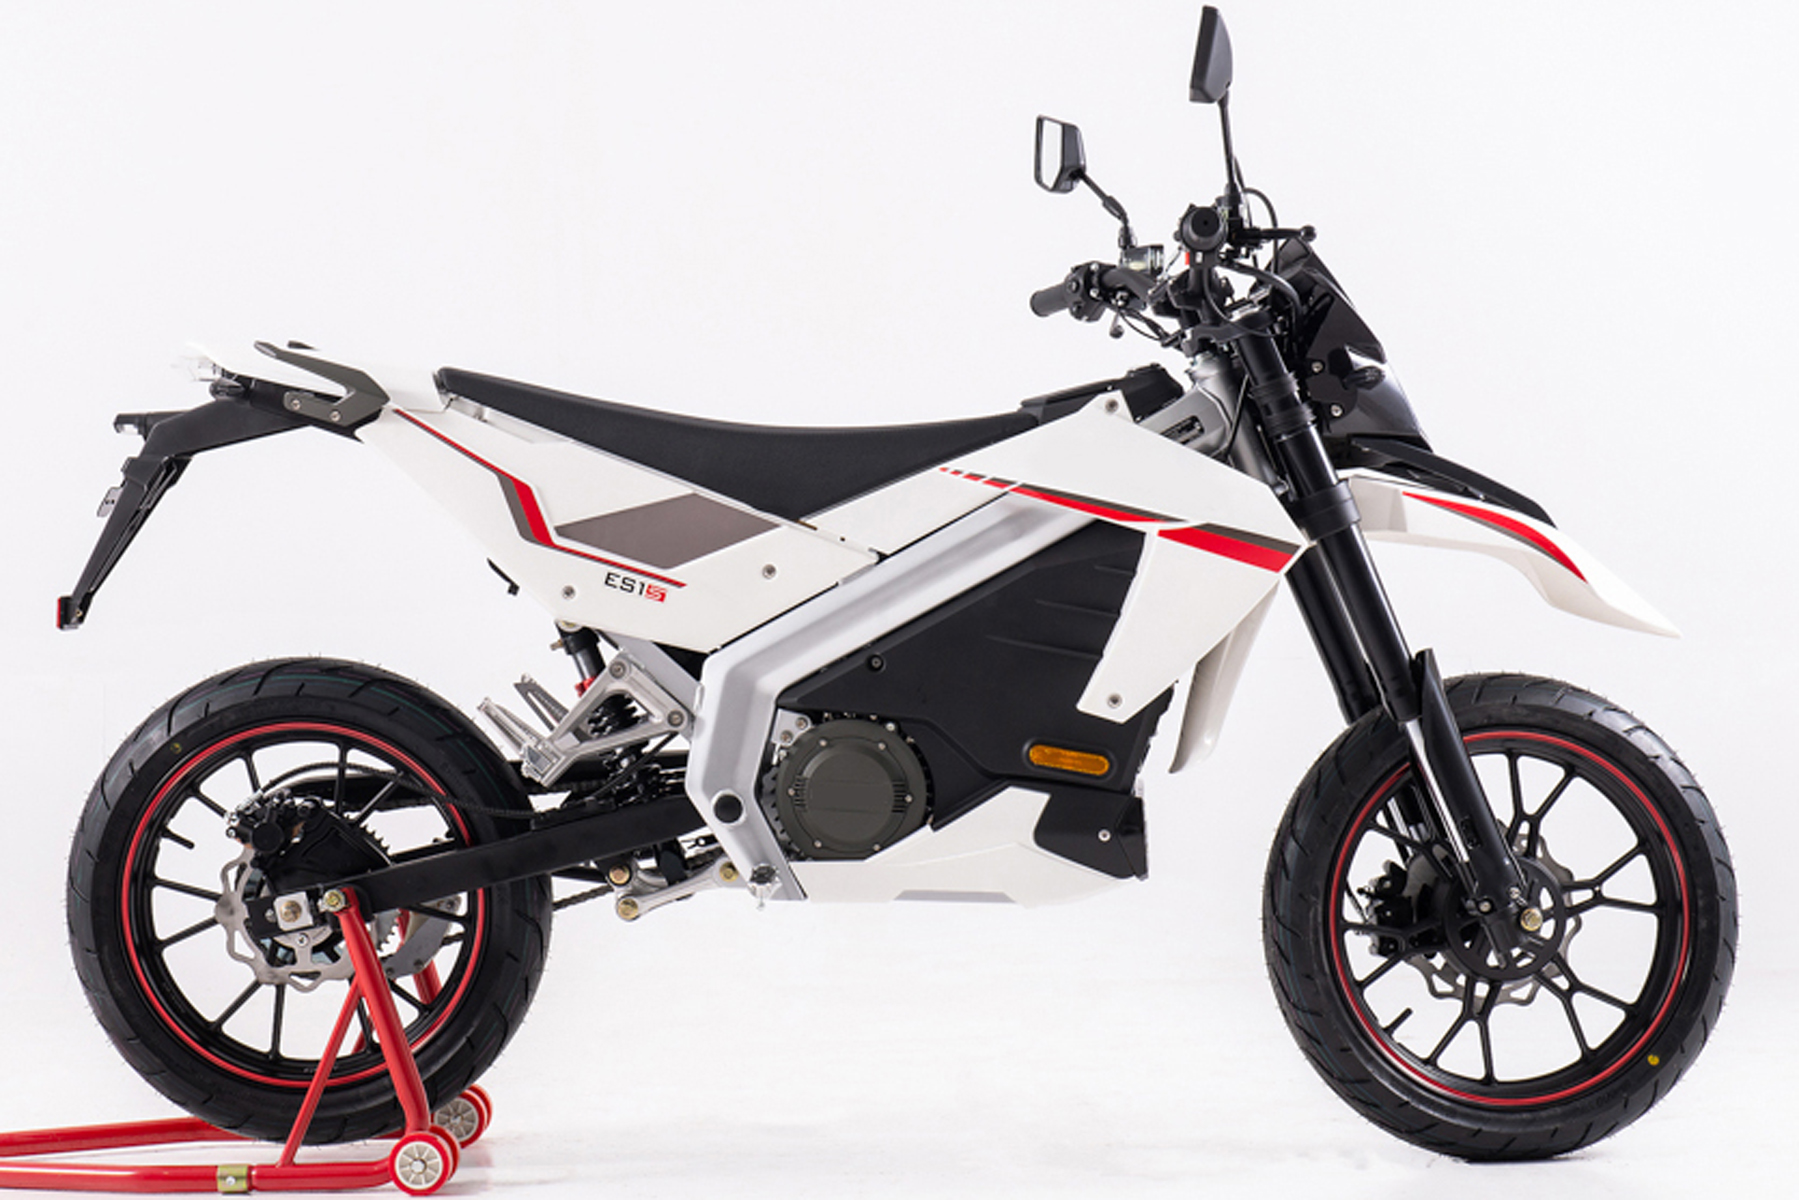 Electric ES1-SPro - Street Legal Motorcycle available on Maui